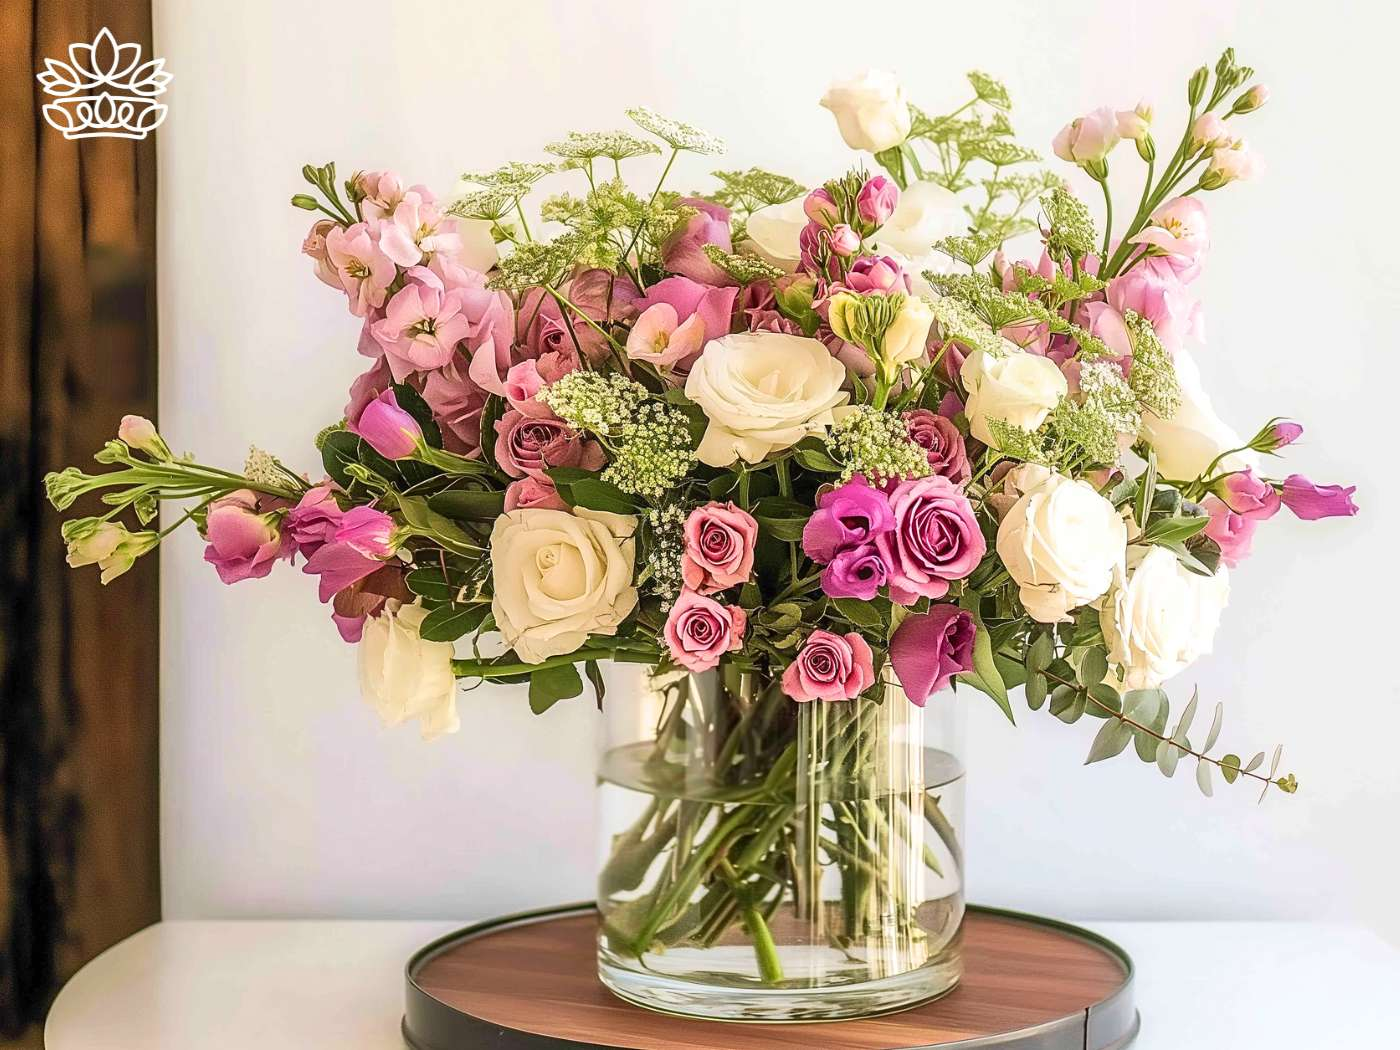 Elegant flower arrangement featuring a blend of pink snapdragons, creamy roses, and deep purple blooms in a clear glass vase, from Fabulous Flowers and Gifts.